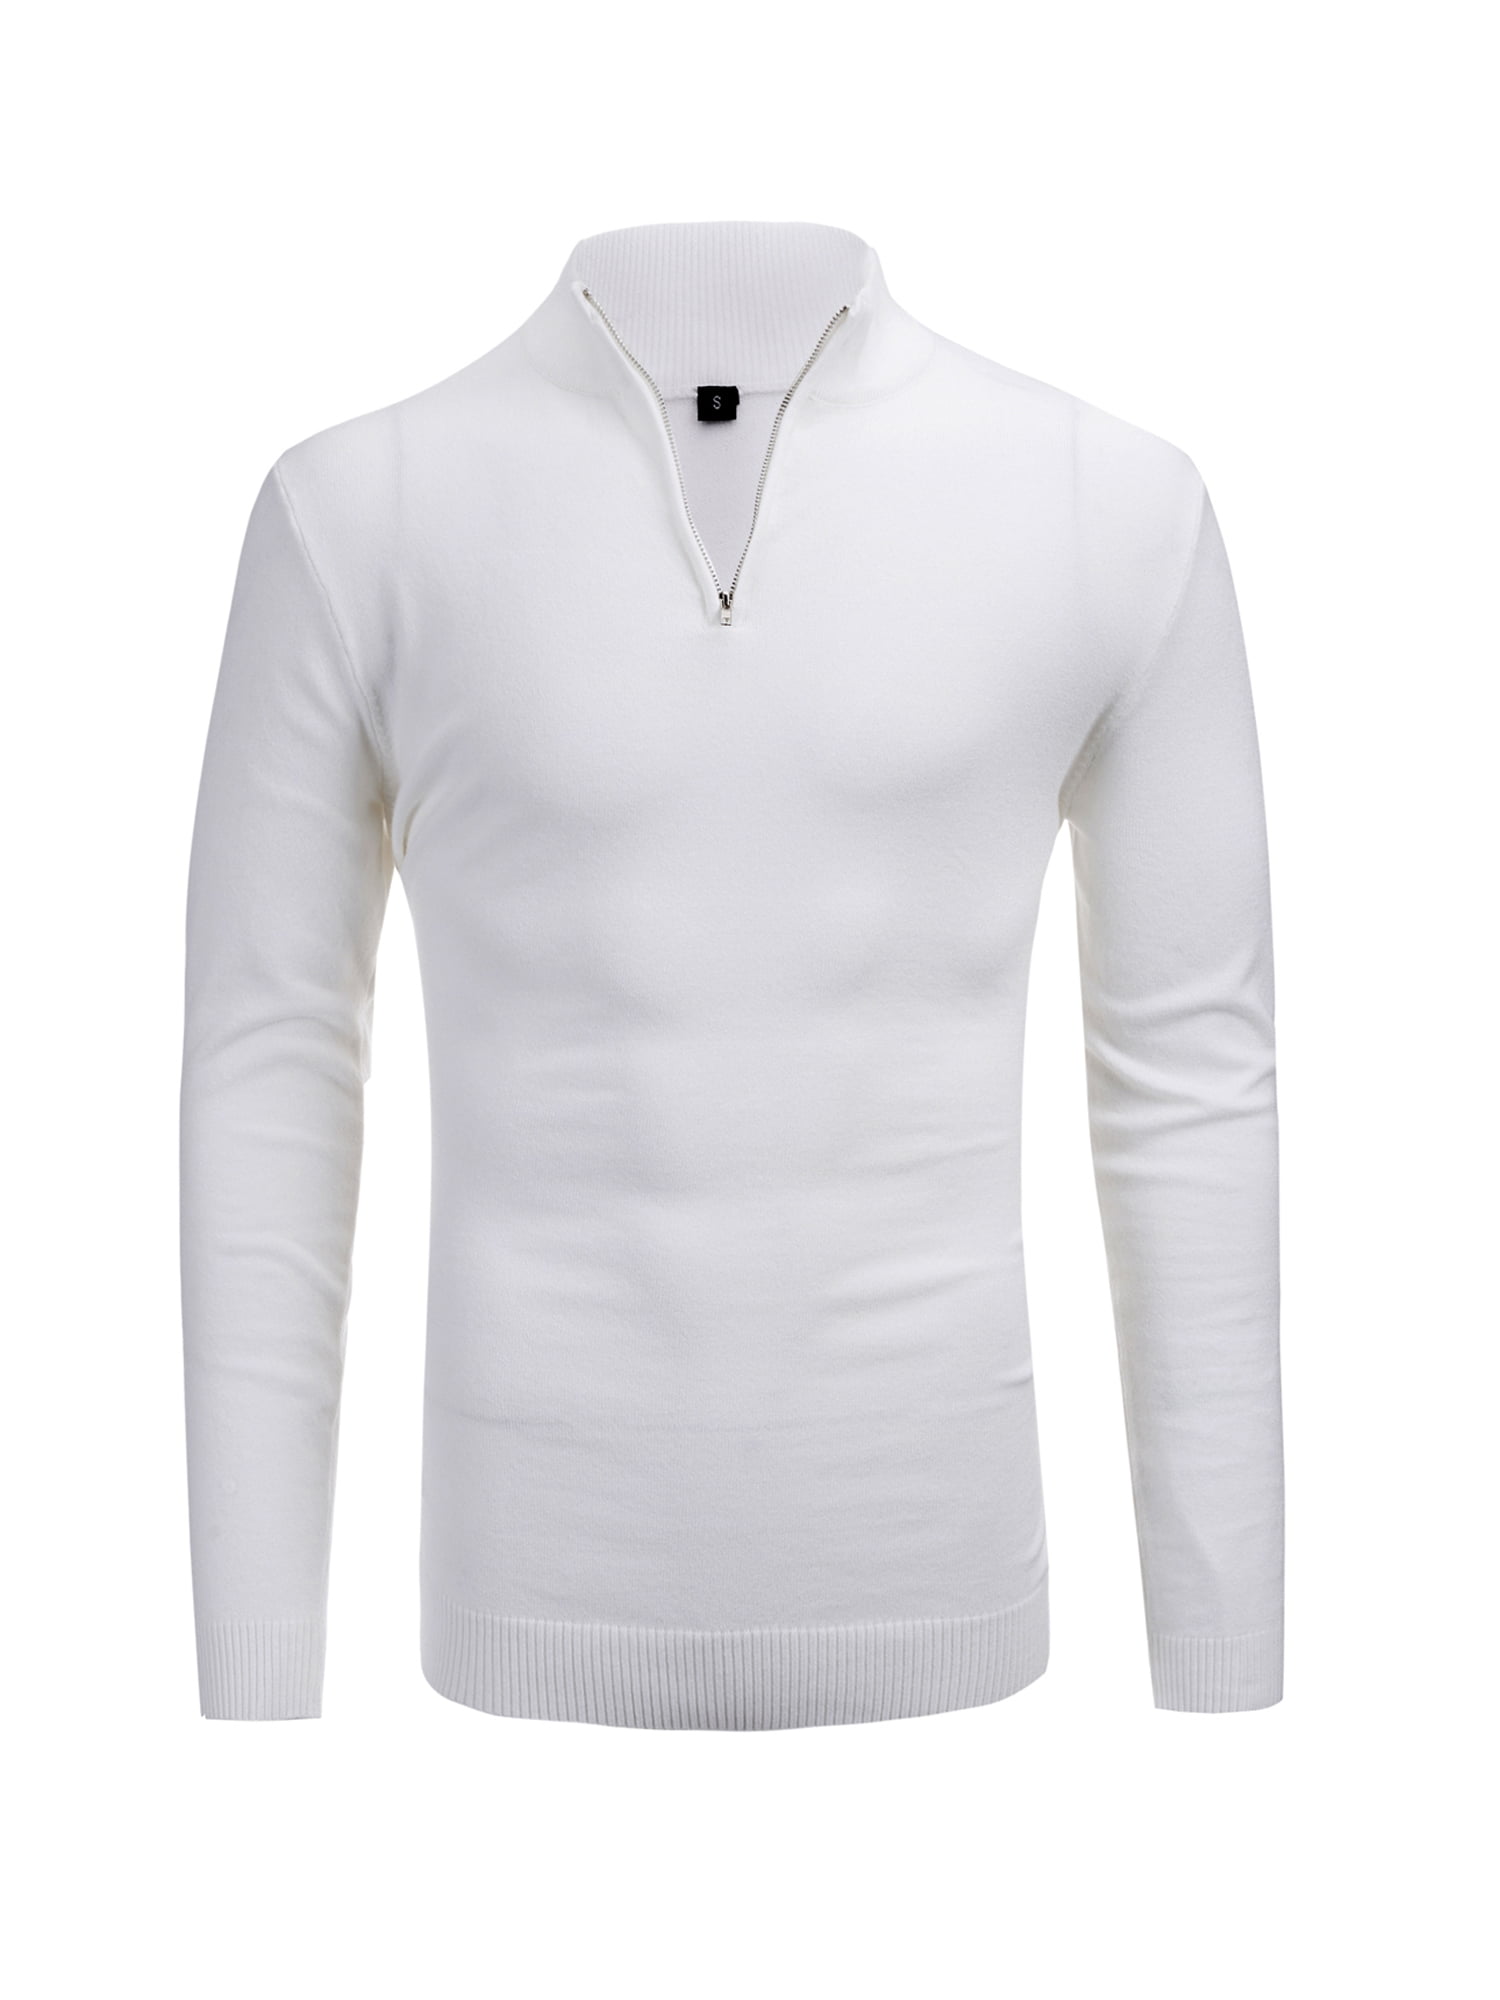 Men/'s Casual Slim Fit Long Sleeve Pullover Top Mock Neck T Shirt Men/'s Basic Tops Knitted Thermal Pullover Sweater-shirts